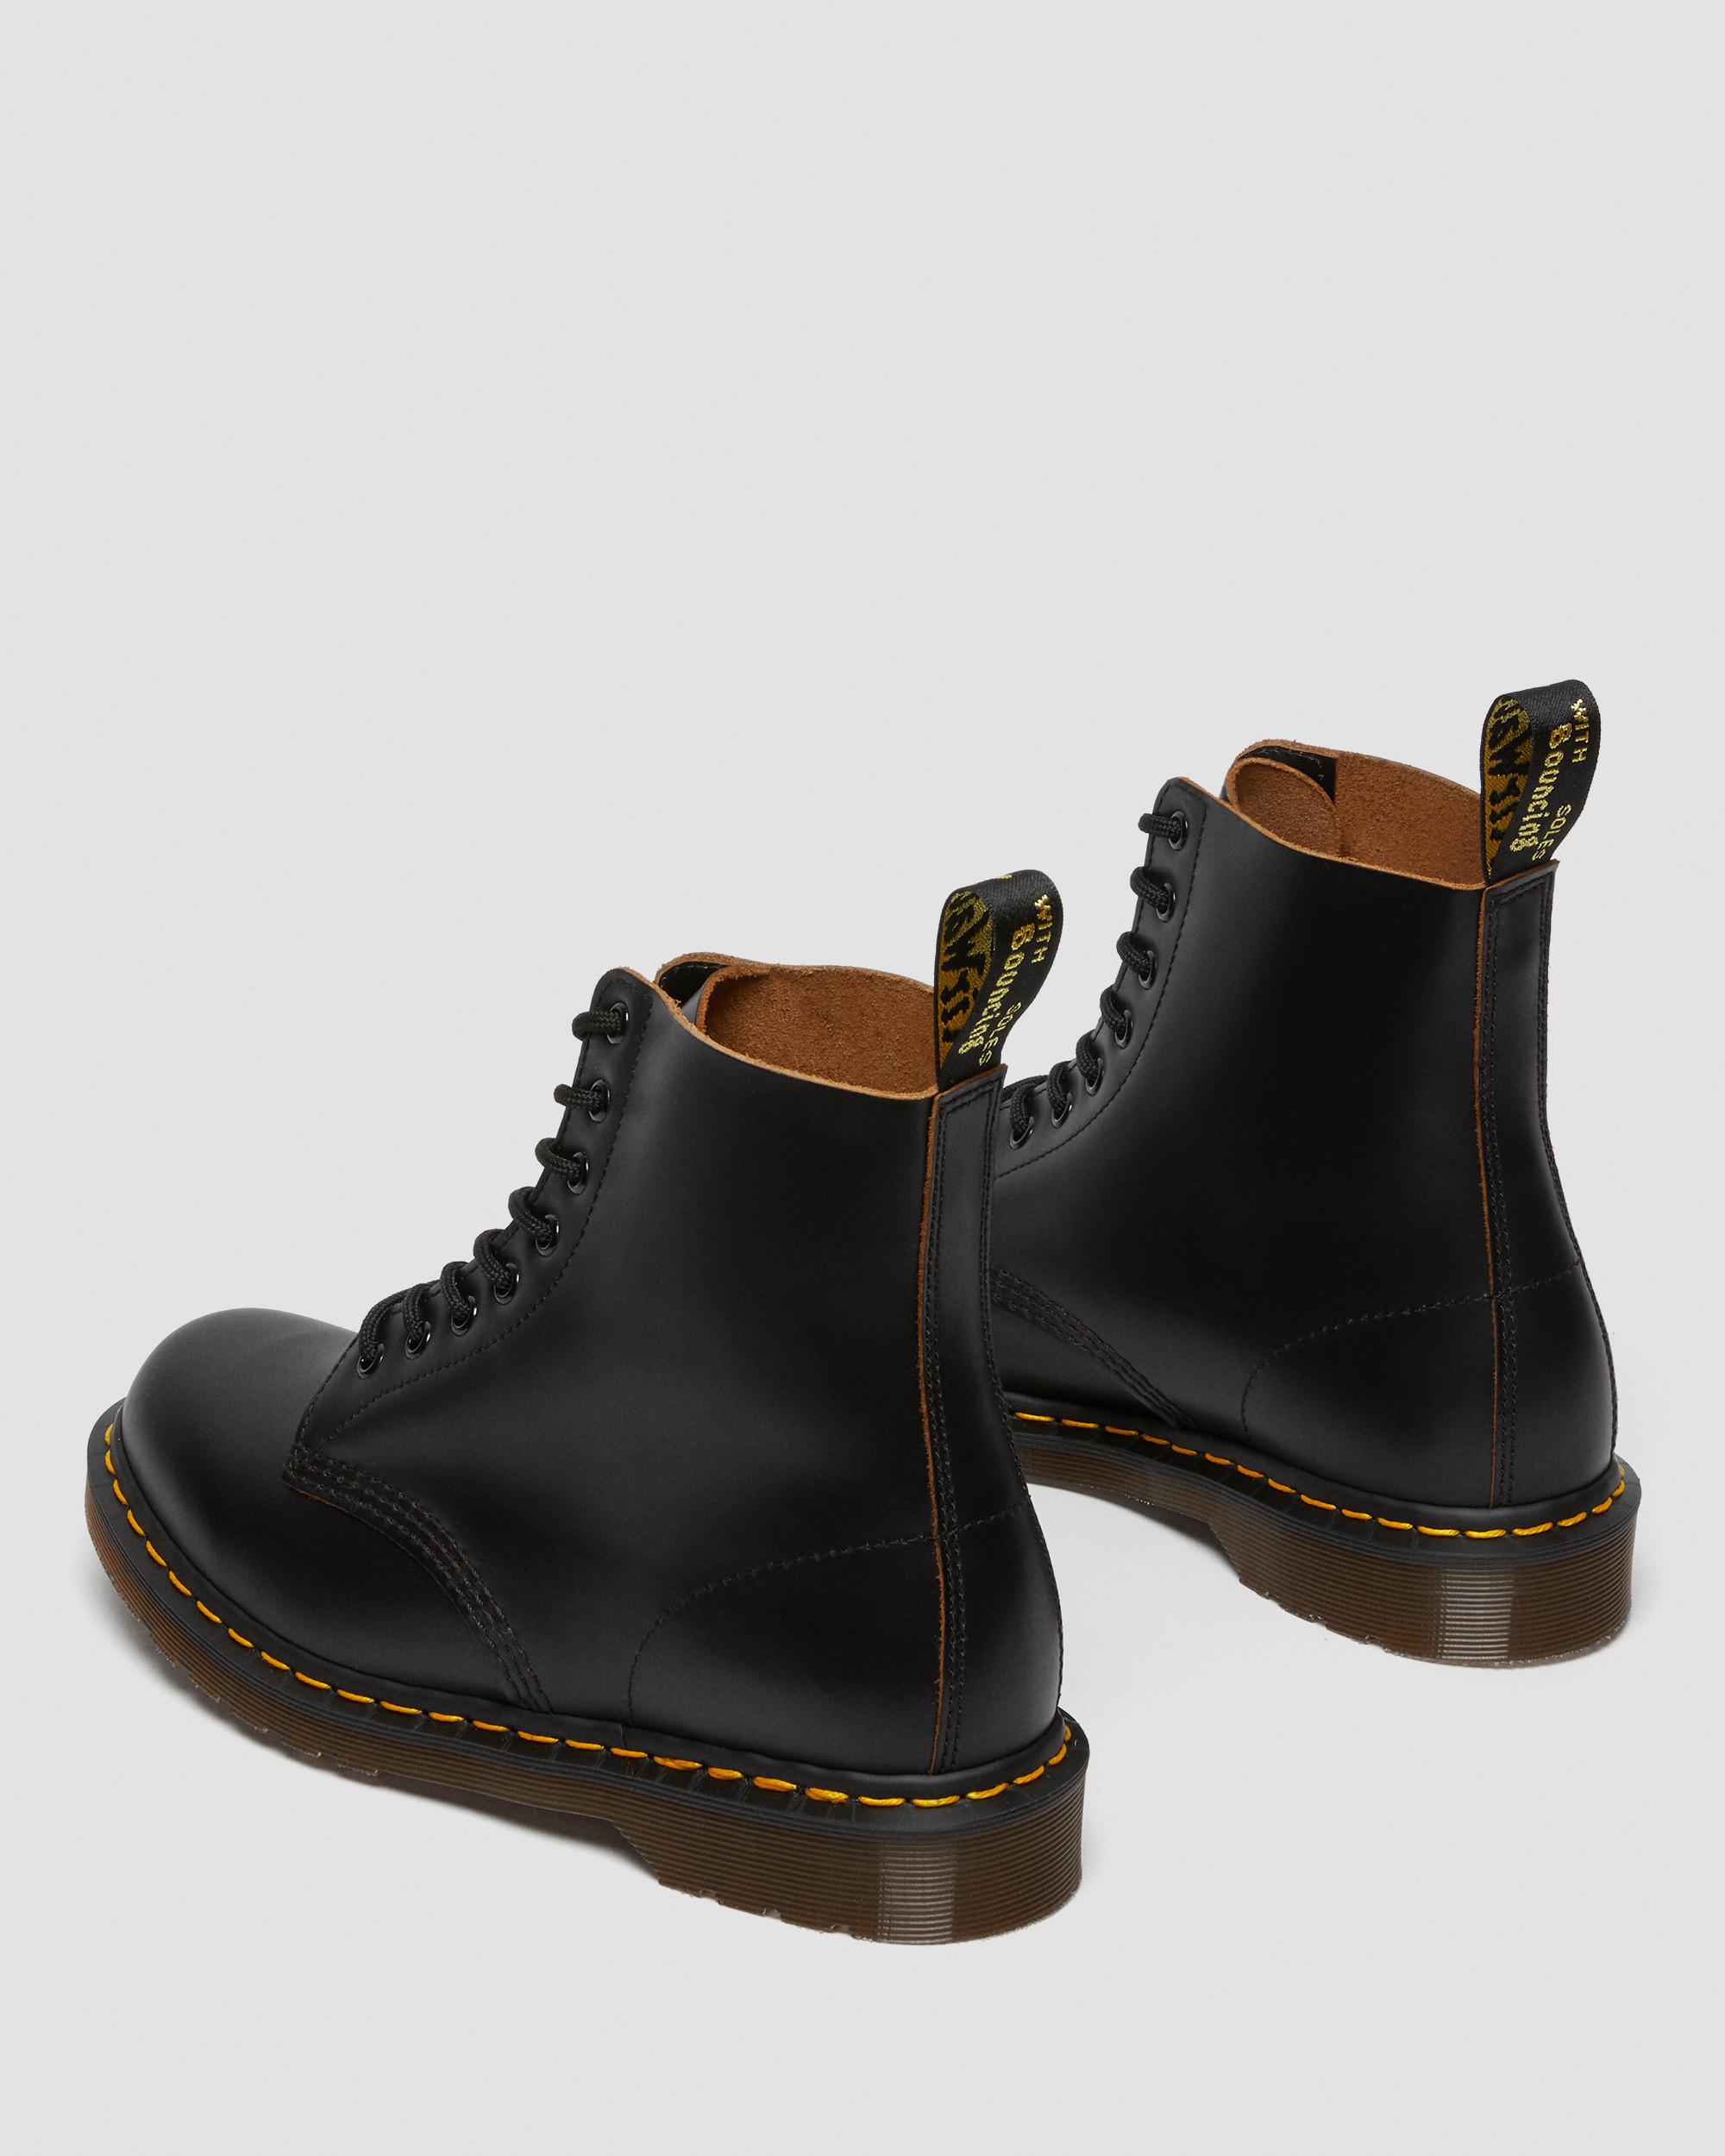 Paja Fiesta segundo 1460 Vintage Made in England Lace Up Boots | Dr. Martens